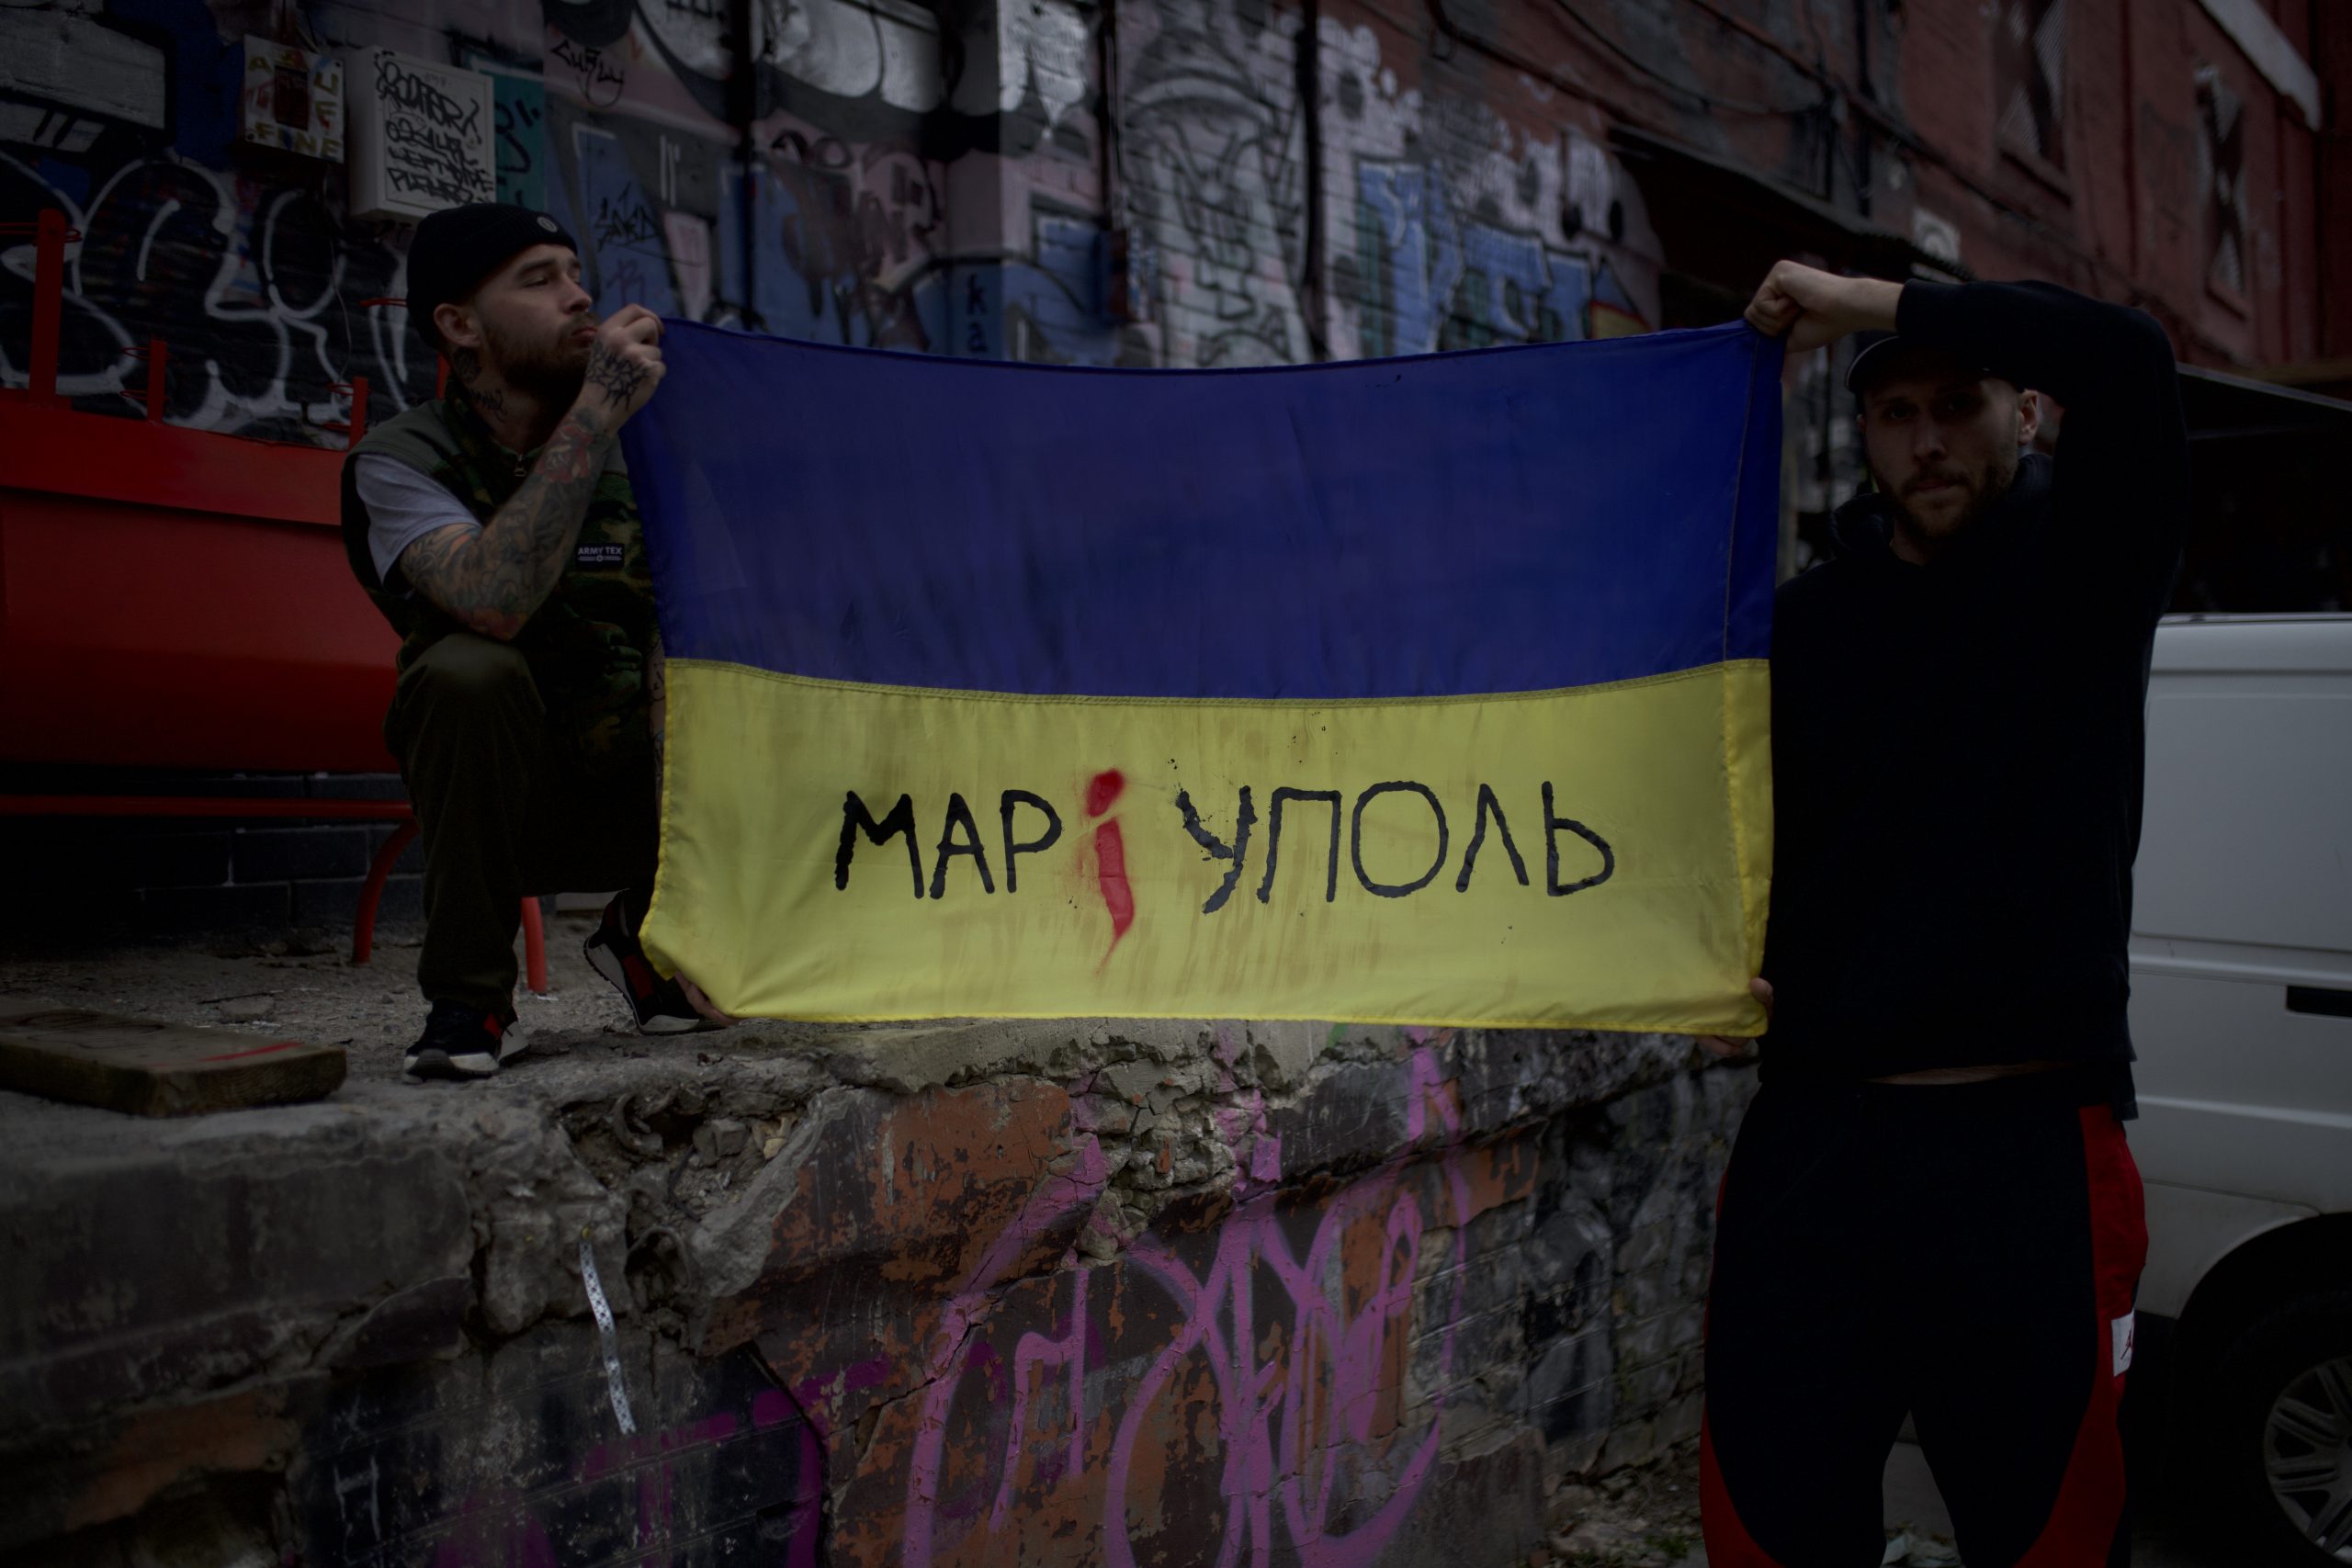 ICIP and NOVACT document experiences of nonviolent resistance in Ukraine